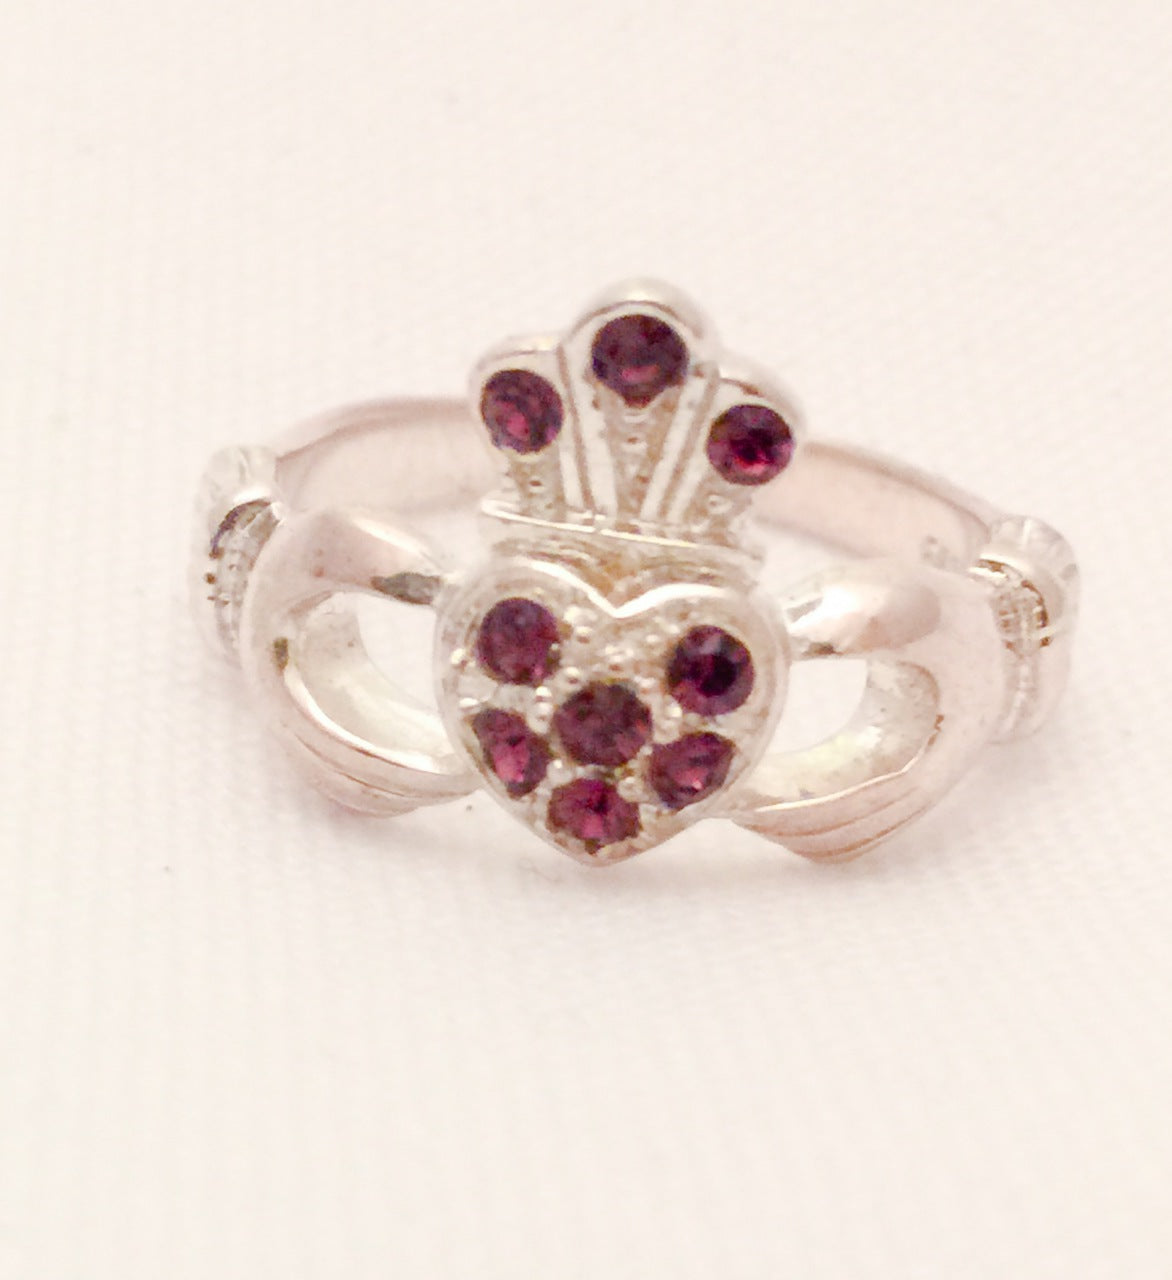 Vintage Claddagh Sterling Silver Ring with Red Crystals Size 5 1/2